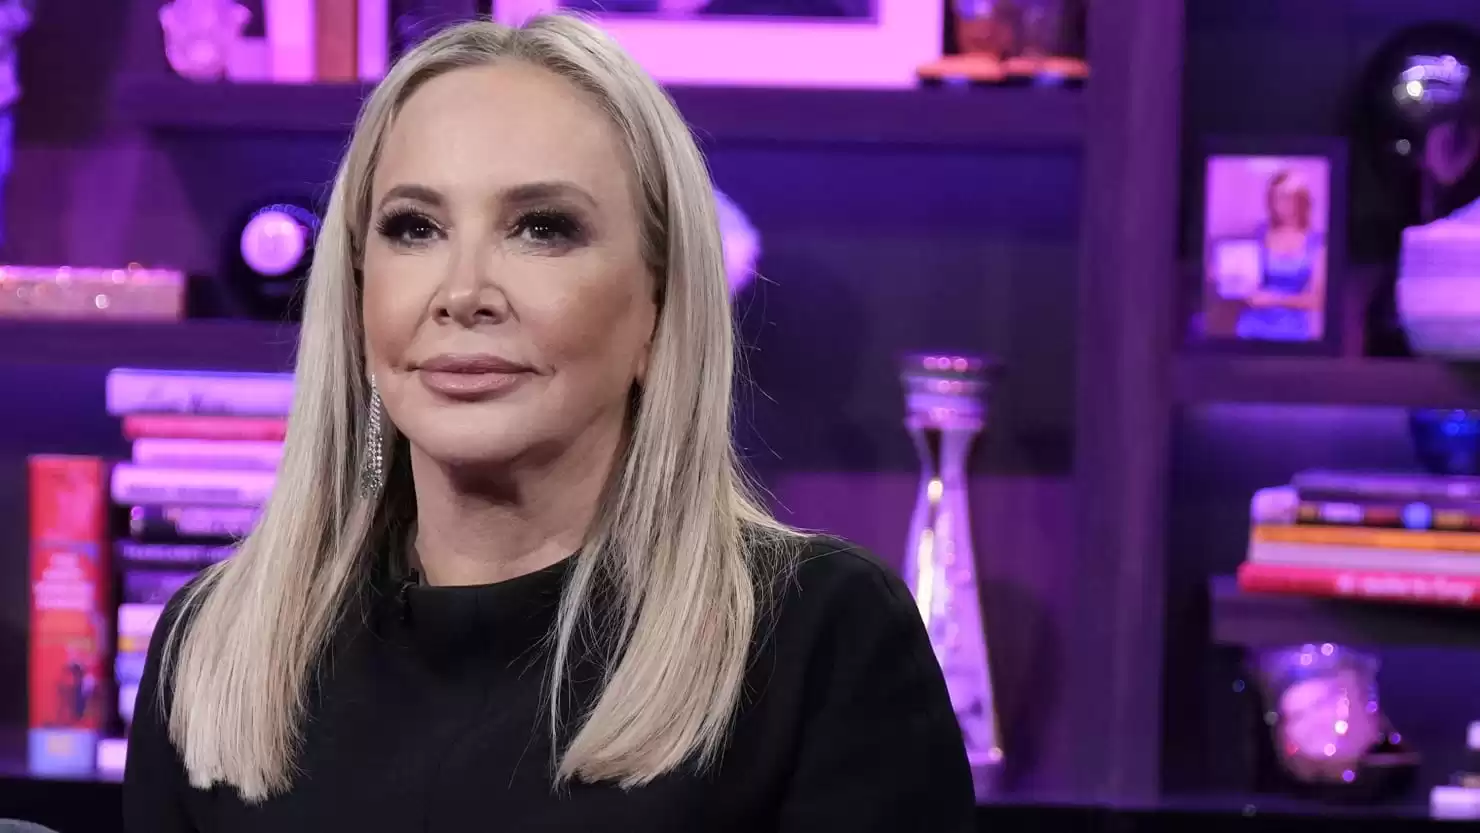 "RHOC Star Shannon Beador Arrested for DUI, Hit-And-Run After Driving Into House"